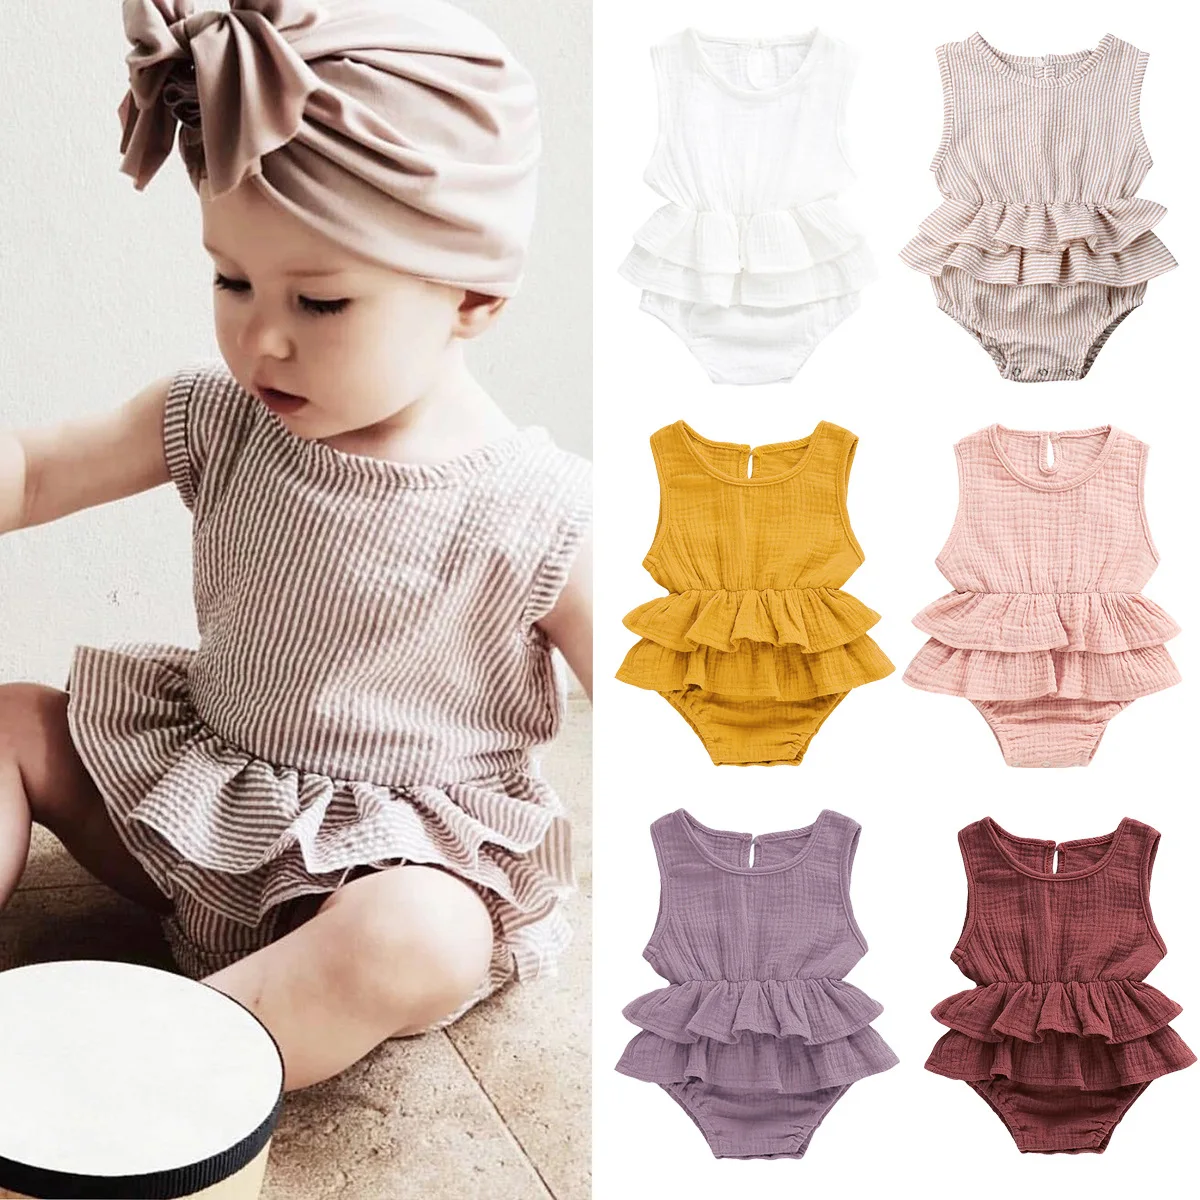 

Petti Newborn Baby Girl Ruffle Organic 100% Muslin Cotton Romper Wholesale Summer Sleeveless Toddle Bodysuit baby clothing, Picture shows ,many colors